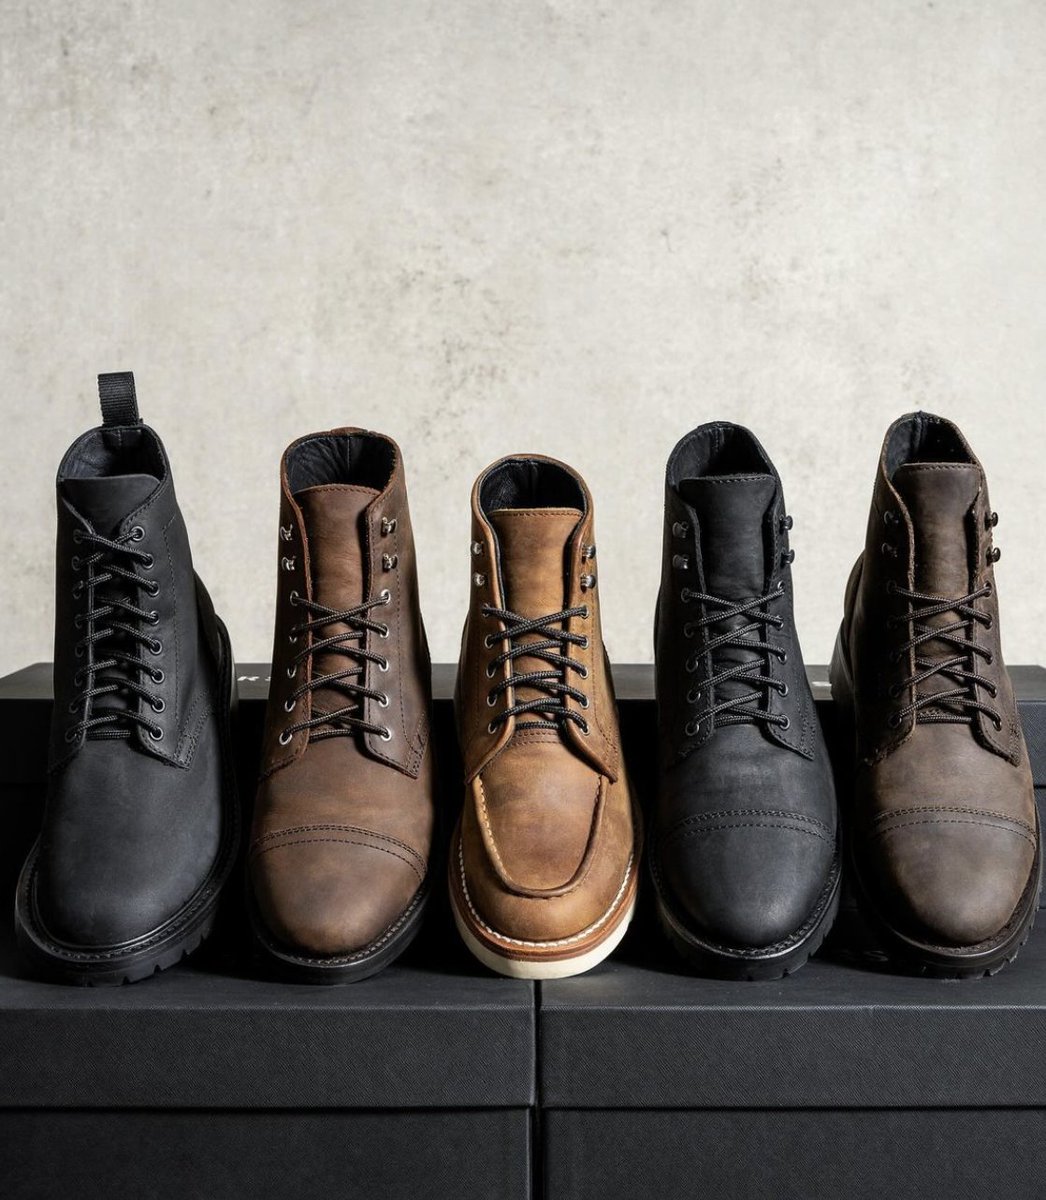 See Your Favorite? 👀
#ThursdayBoots #Rugged
#MensBoots #BootSeason
#WinterEssentials #SpringEssentials